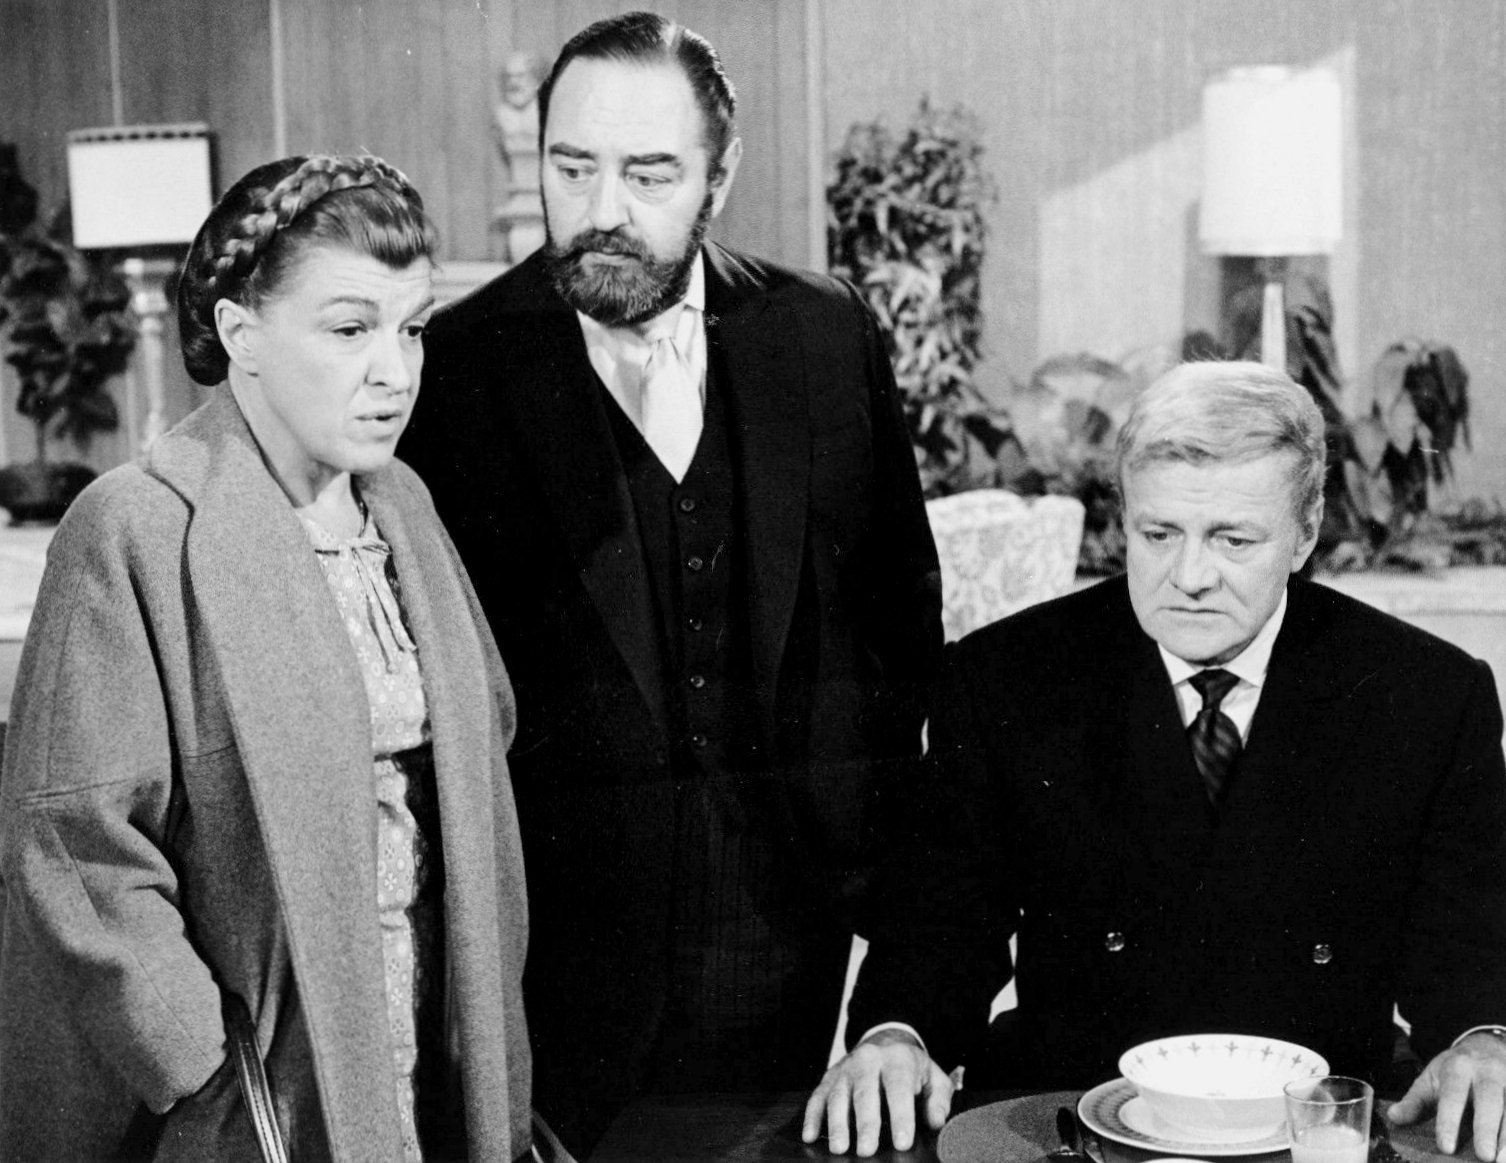 Sebastian Cabot, Nancy Walker, and Brian Keith in a 1970 promotional photograph for "Family Affair" | Source: WIkimedia Commons